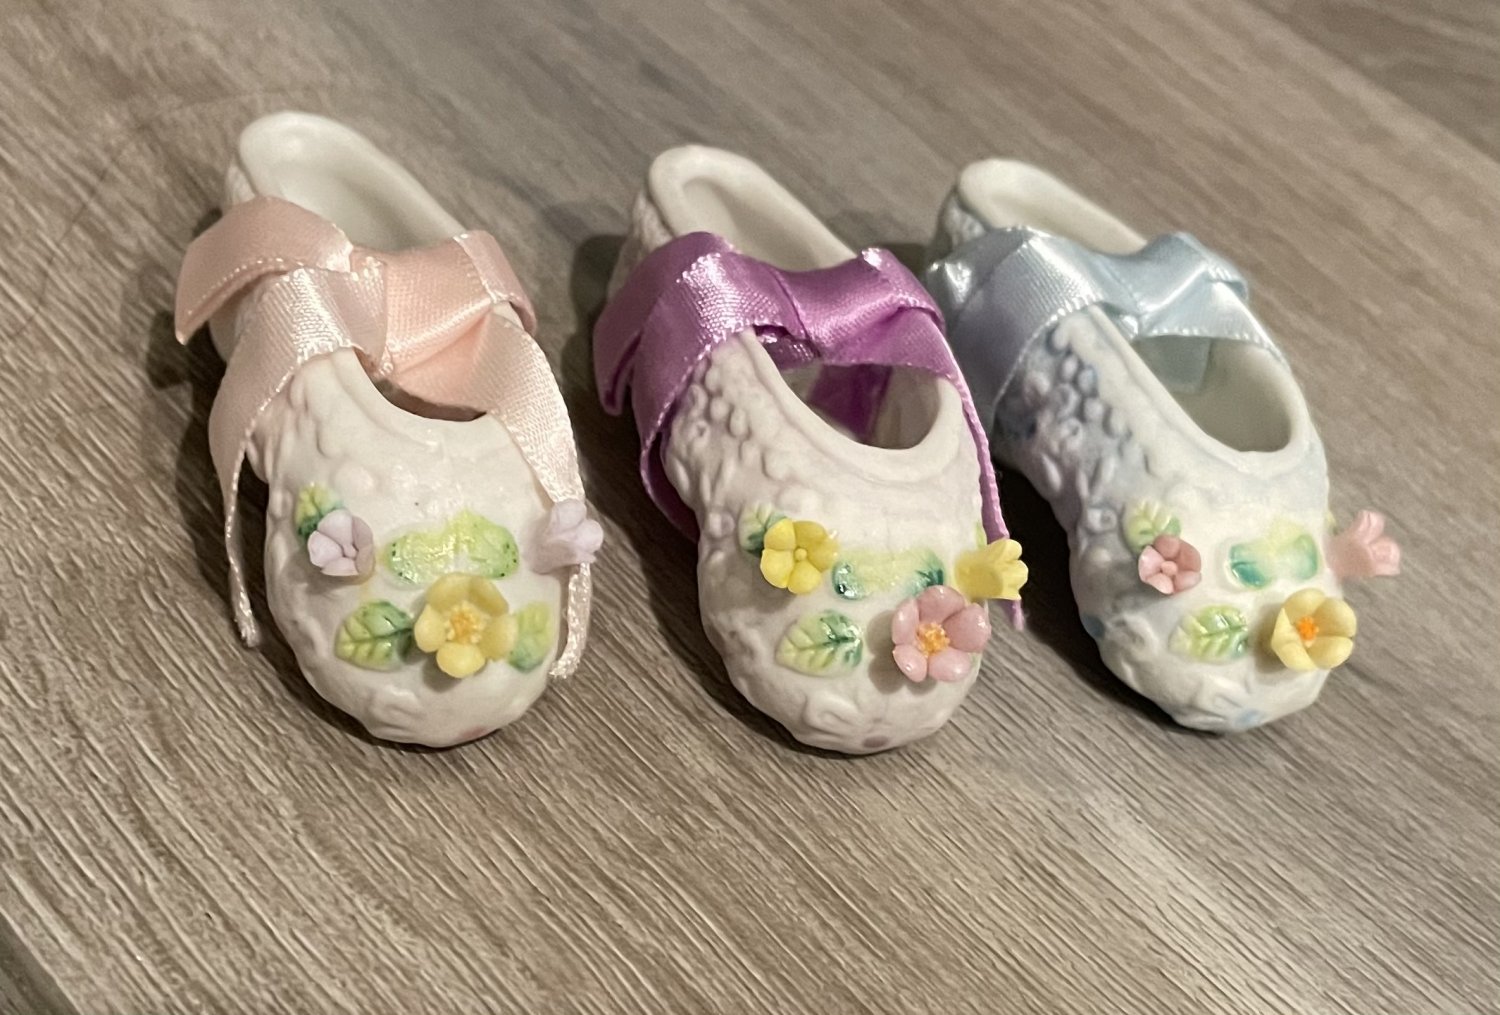 Set of 3 Small Ballerina Slippers in Pink, Blue and Lavender by Enesco 1983 #38